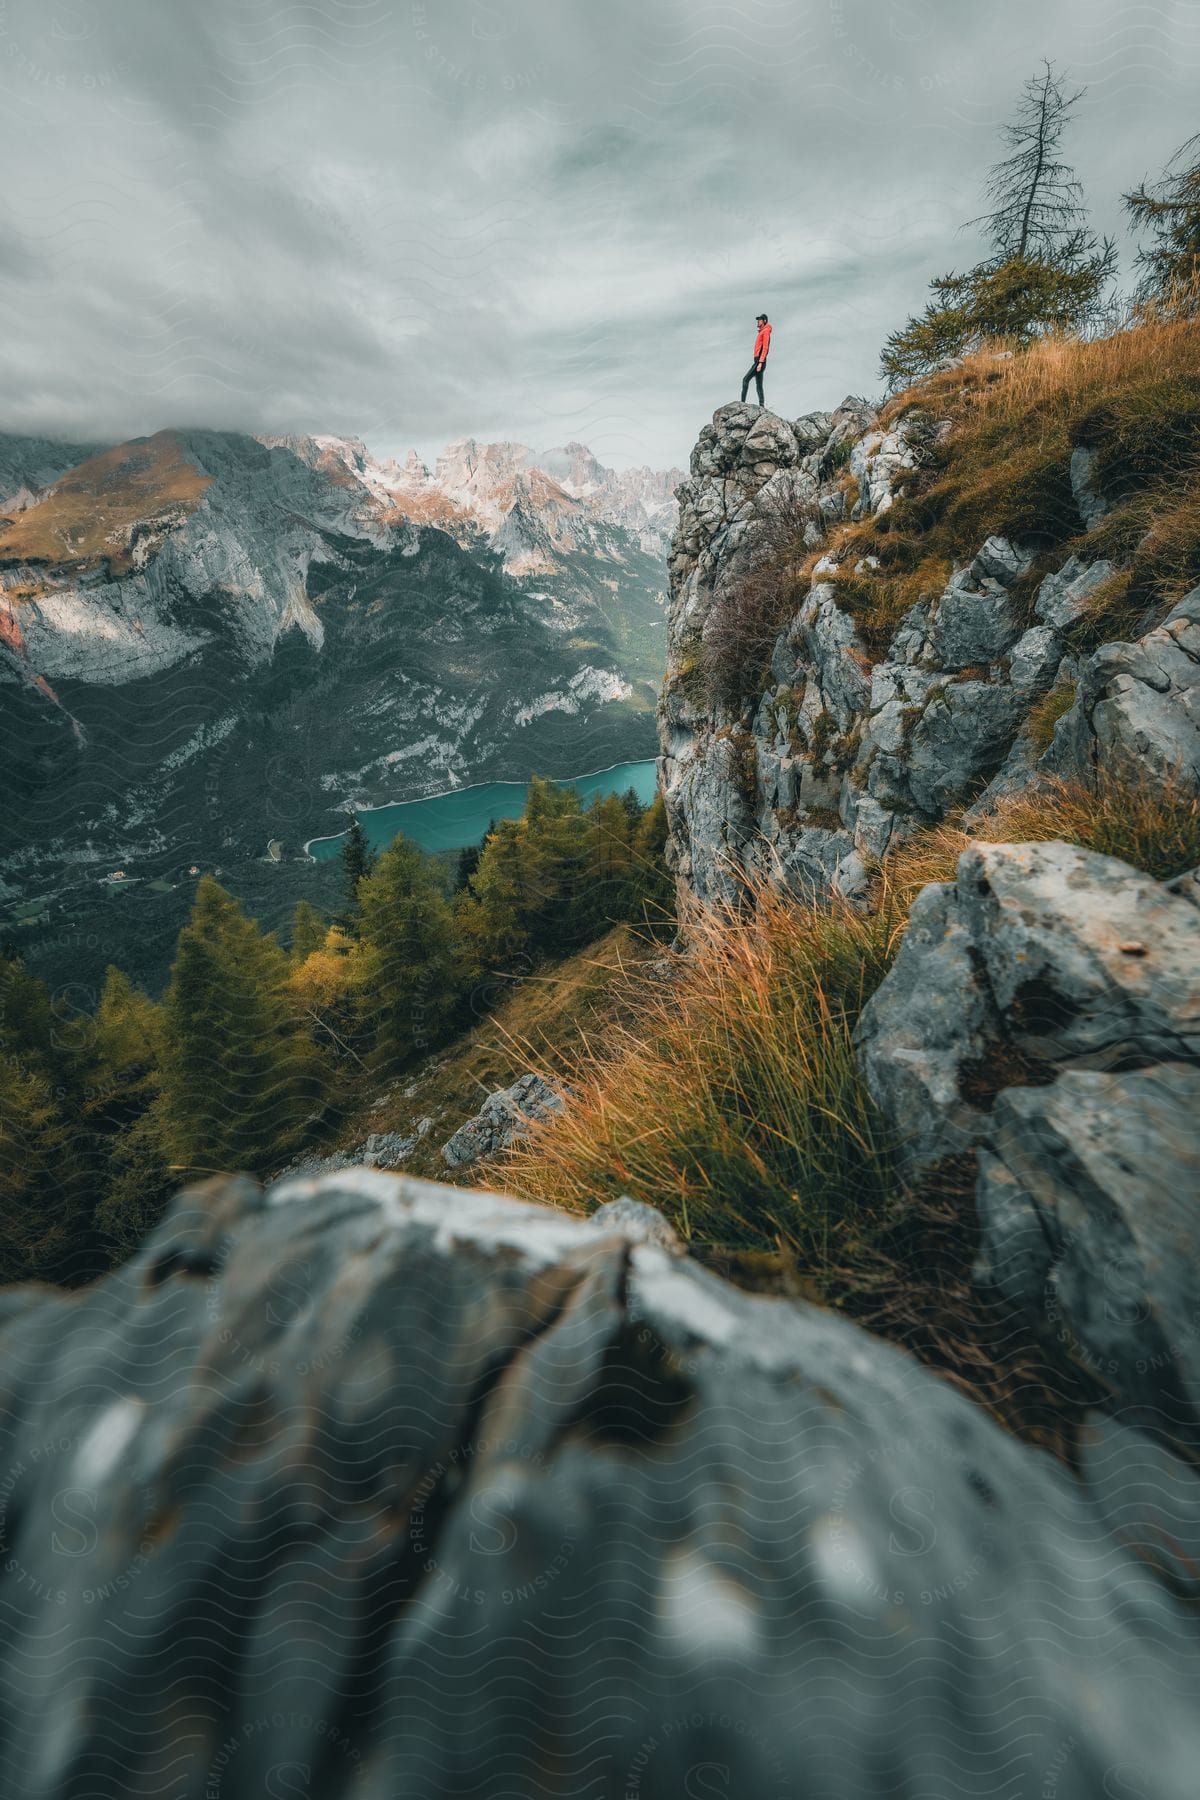 A person standing at the edge of a cliff outdoors